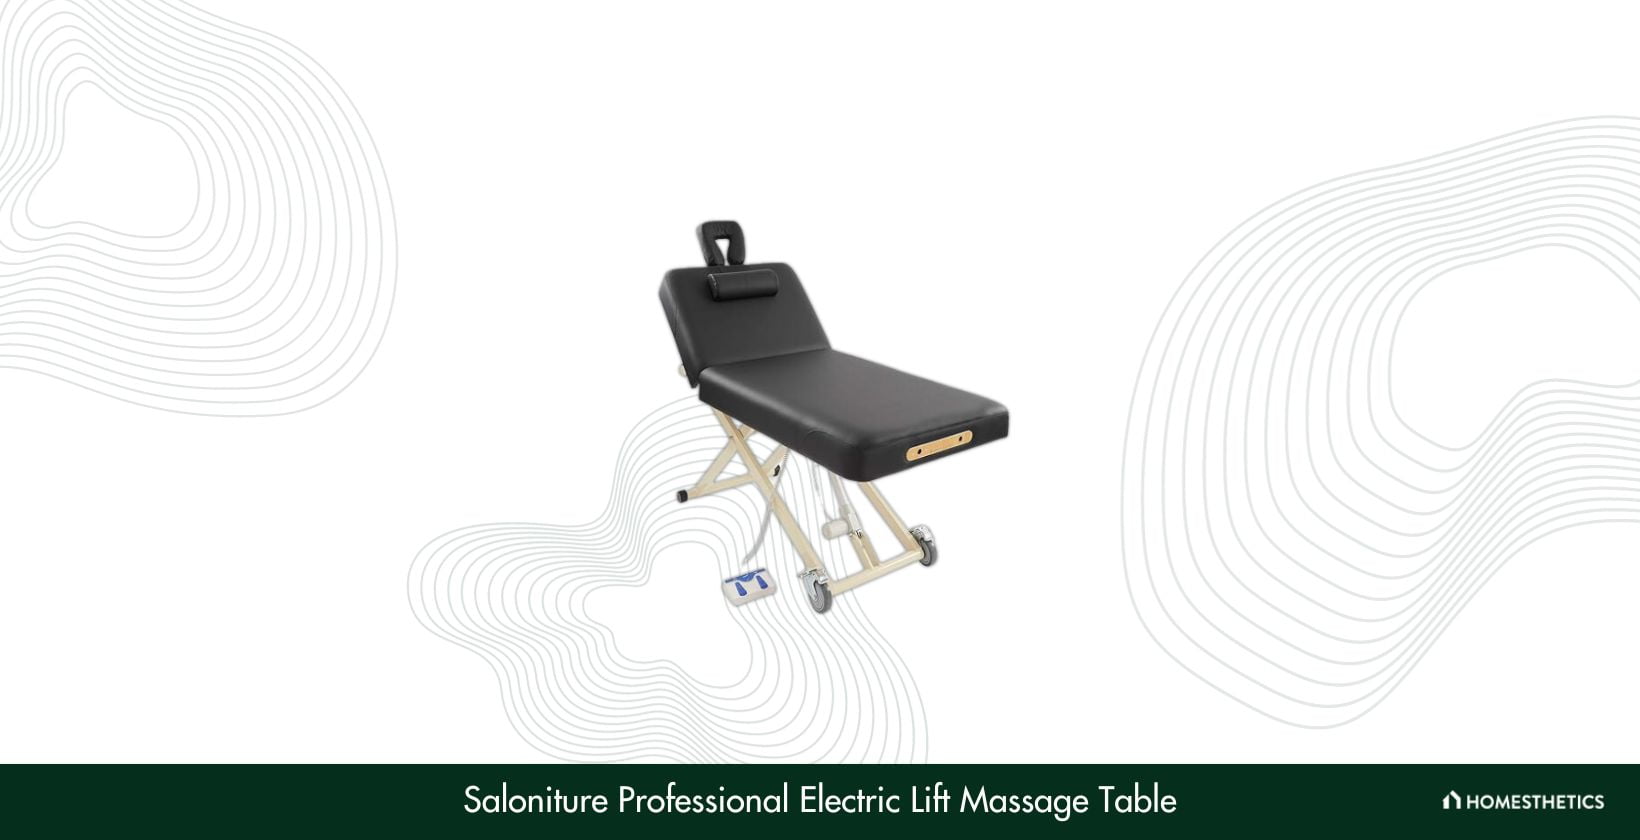 Saloniture Professional Electric Lift Massage Table with Adjustable Backrest SAL TABLE E 2227